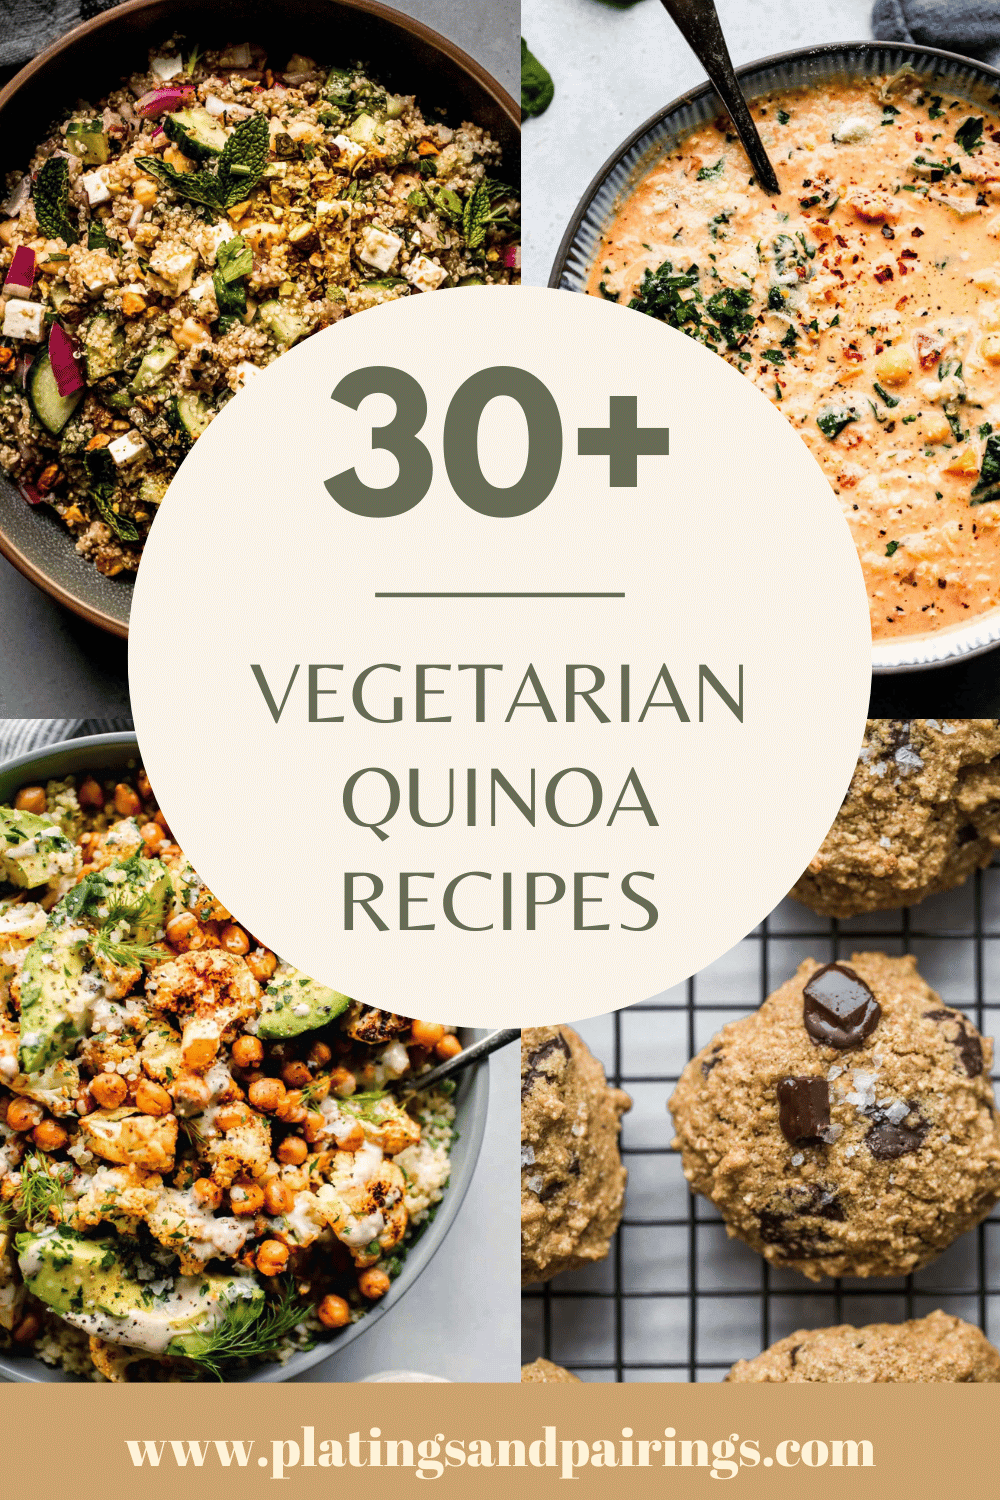 Collage of vegetarian quinoa recipes with text overlay.